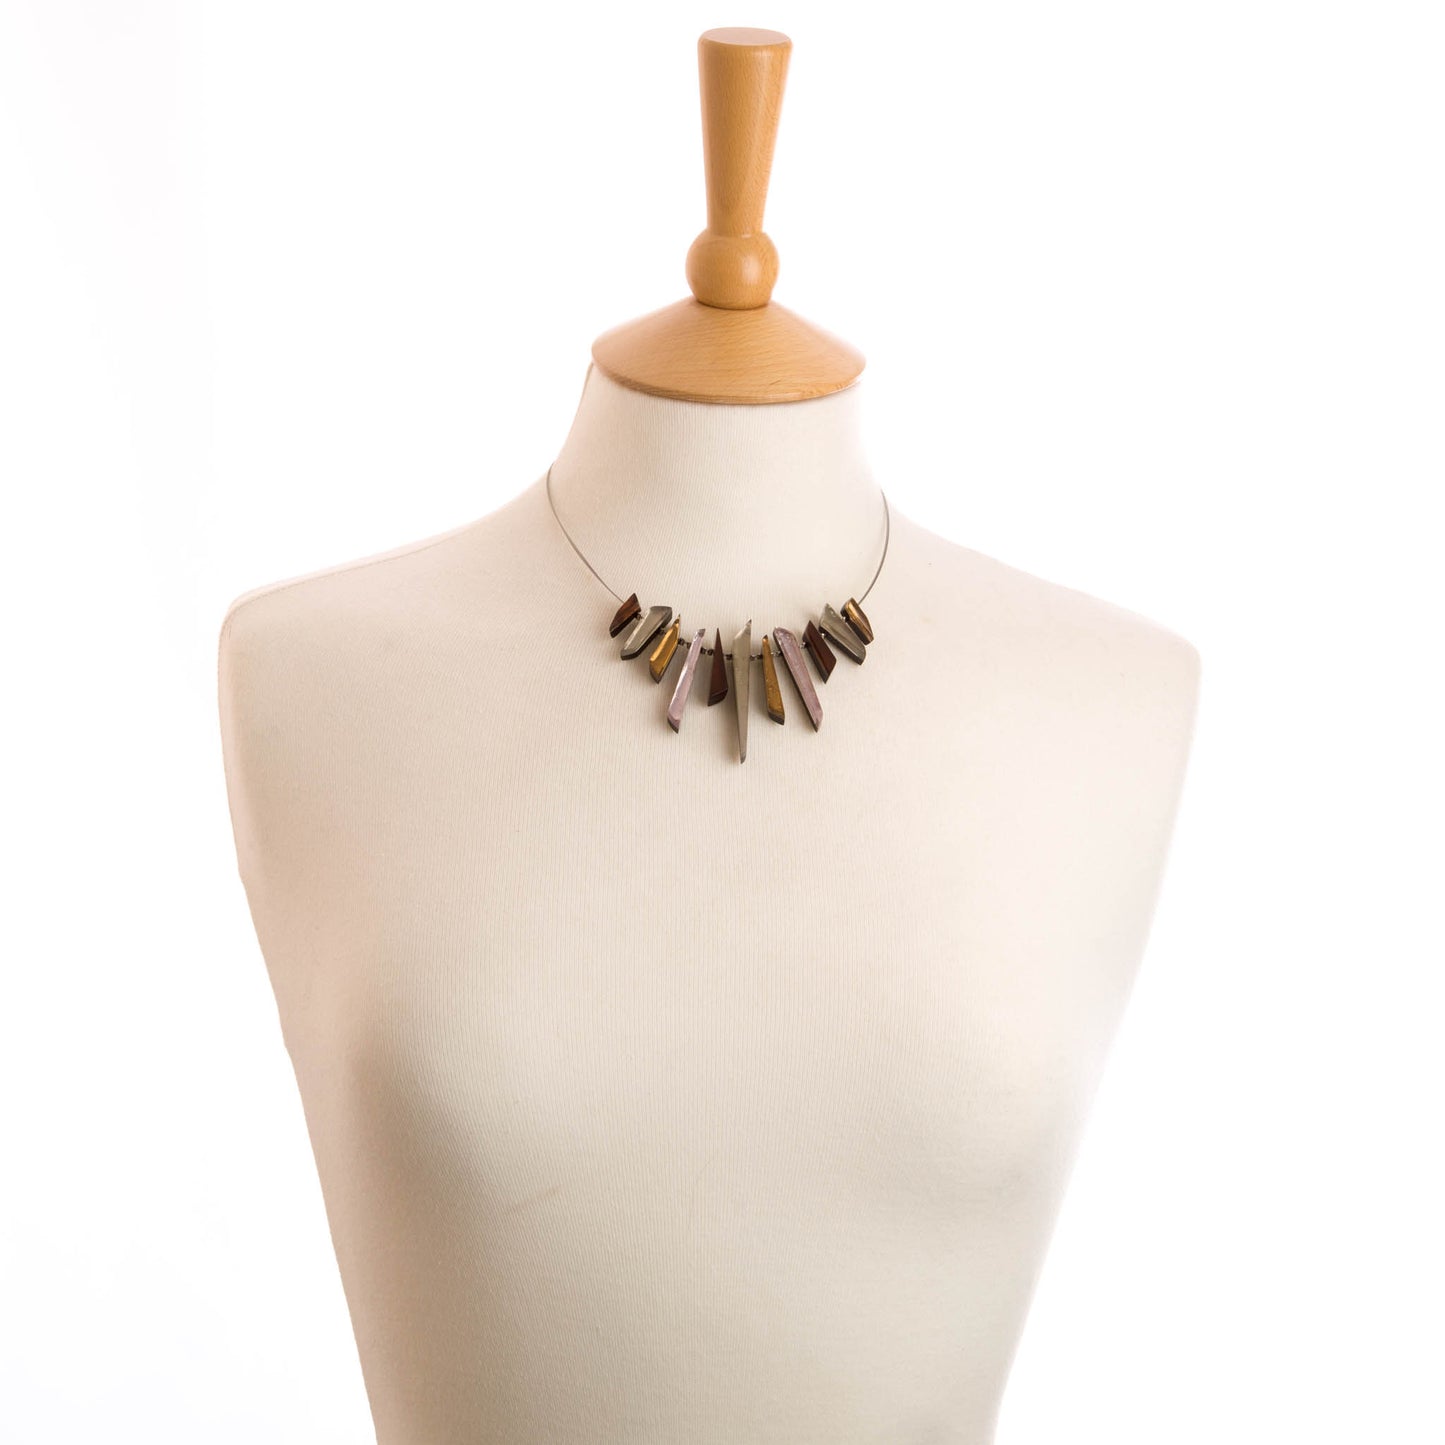 Watch this Space Necklace from the Icicle Collection, Nude colourway